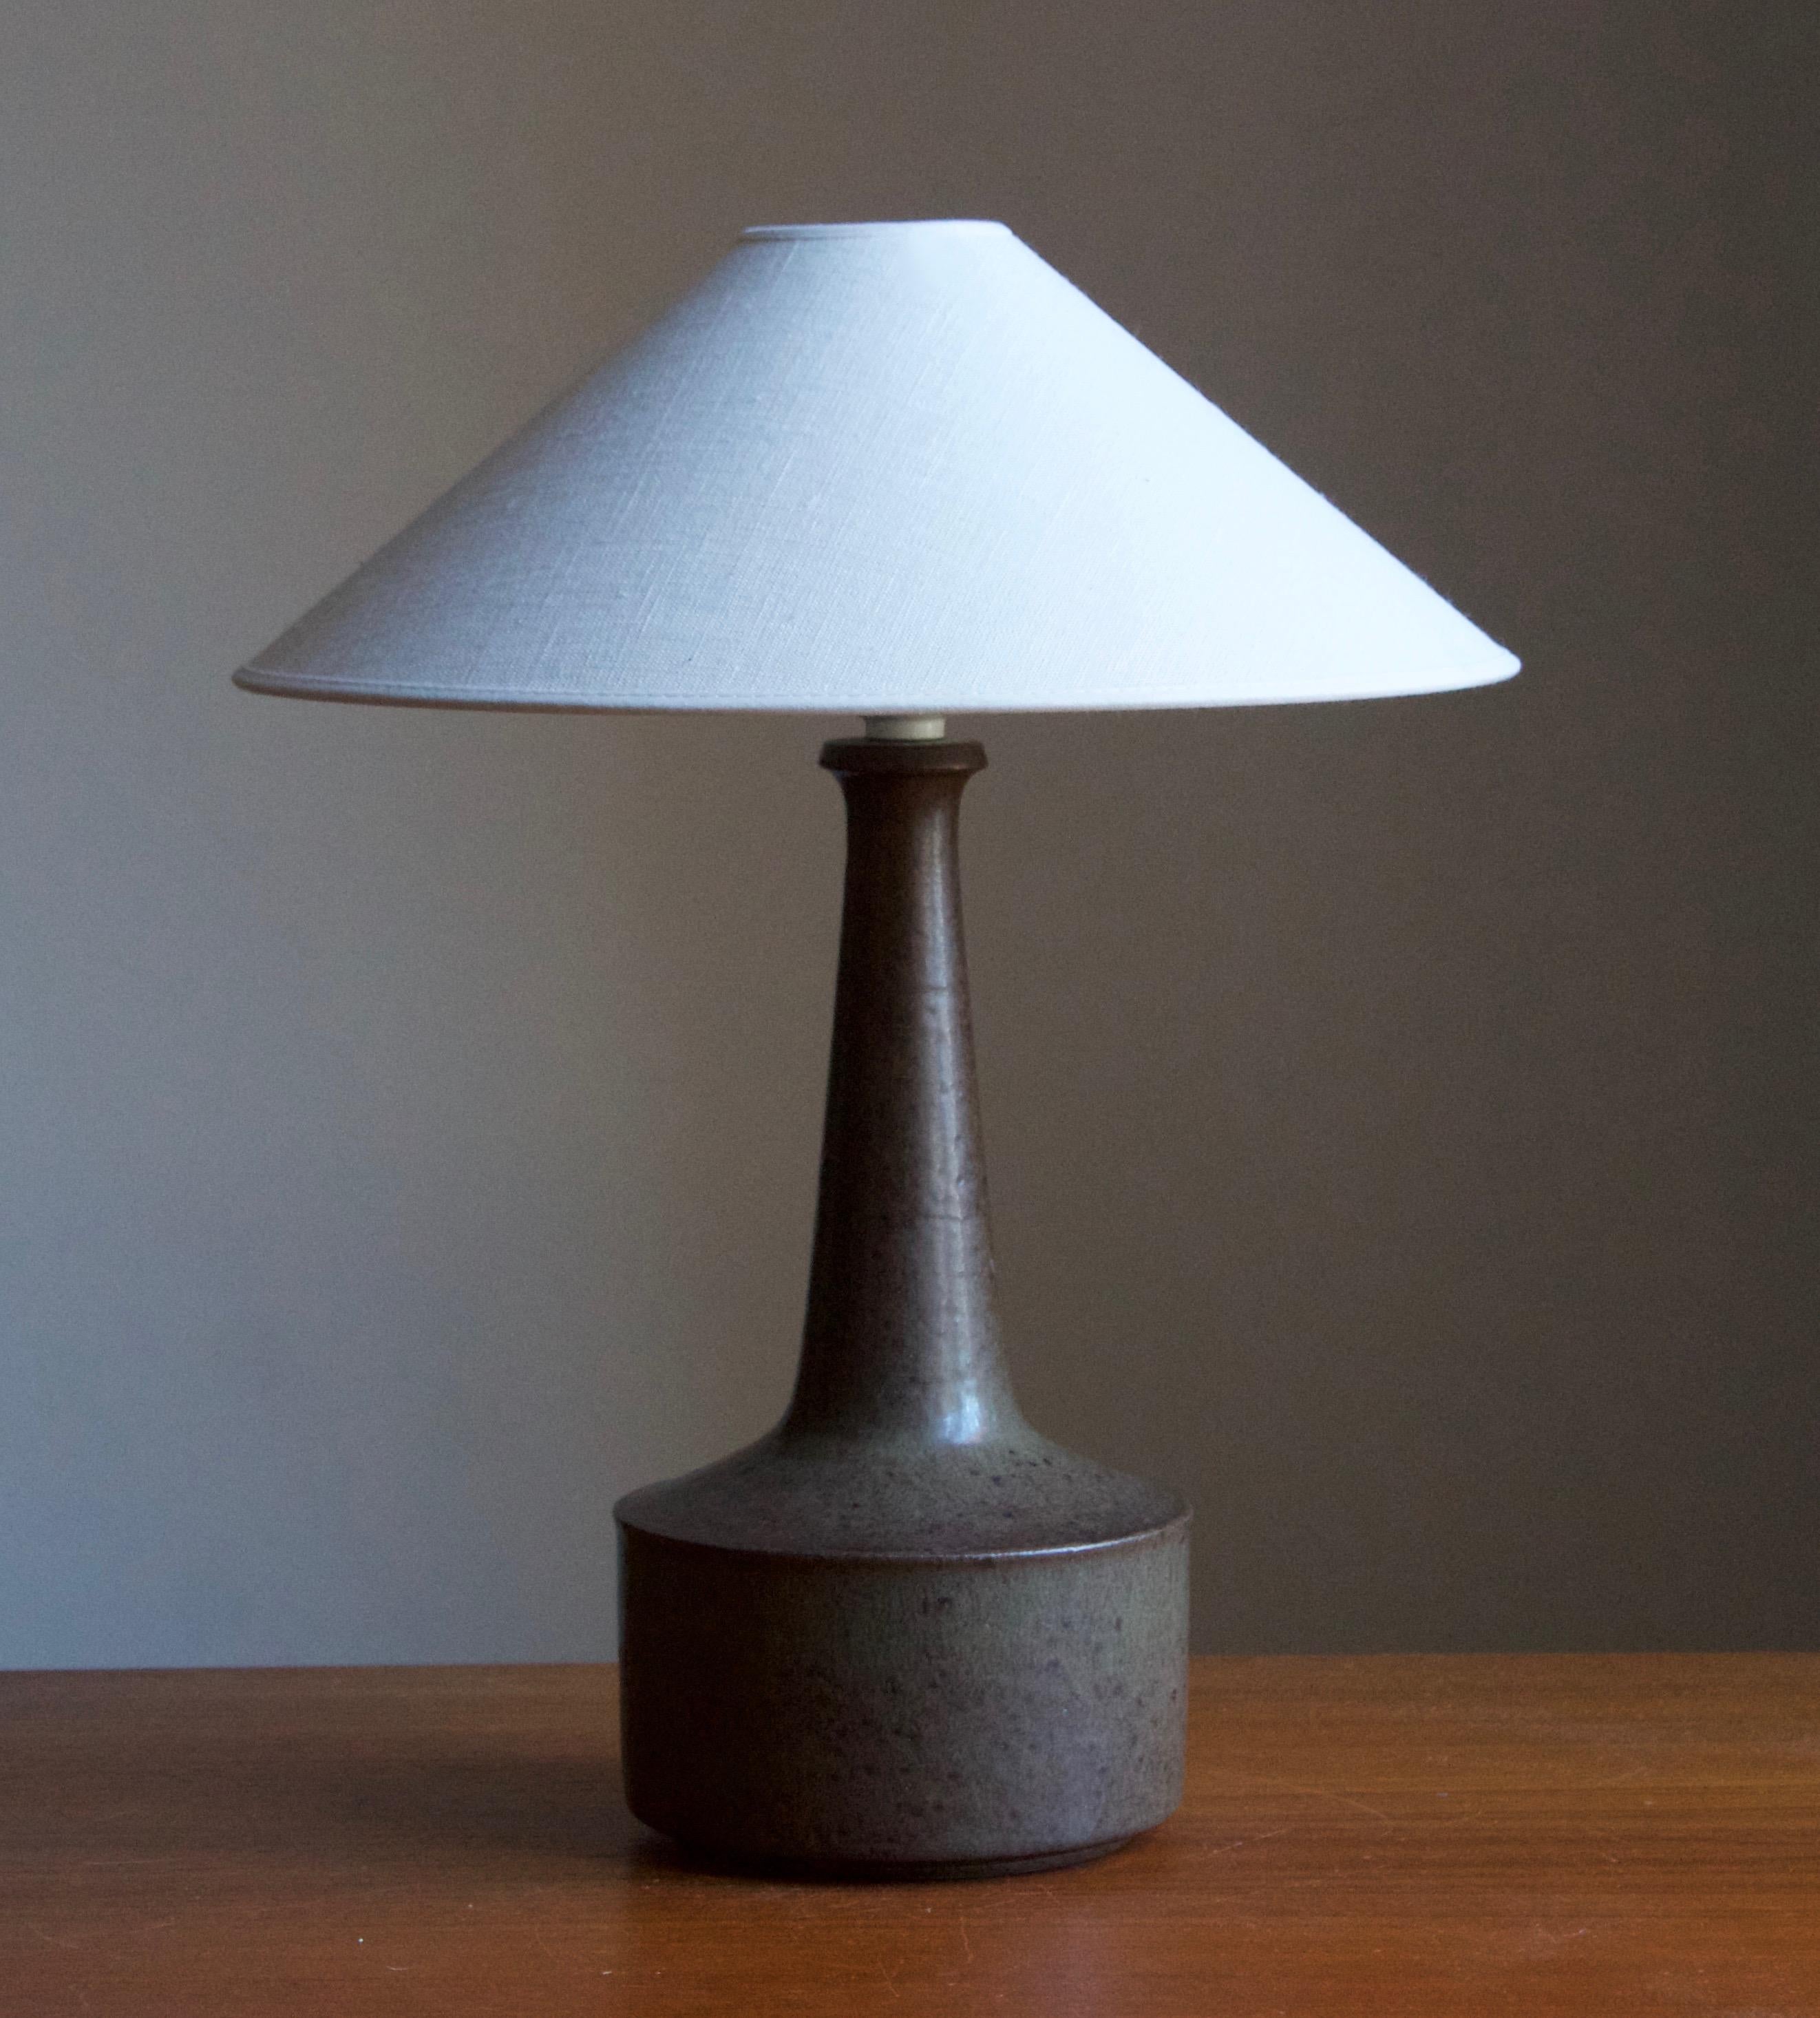 A table / desk lamp designed by husband and wife Per & Annelise Linneman-Schmidt. Handcast in stoneware, green glaze. Produced in their own Studio, named Palshus, in Sengeløse, Denmark. Signed.

Sold without lampshade. Stated dimensions exclude